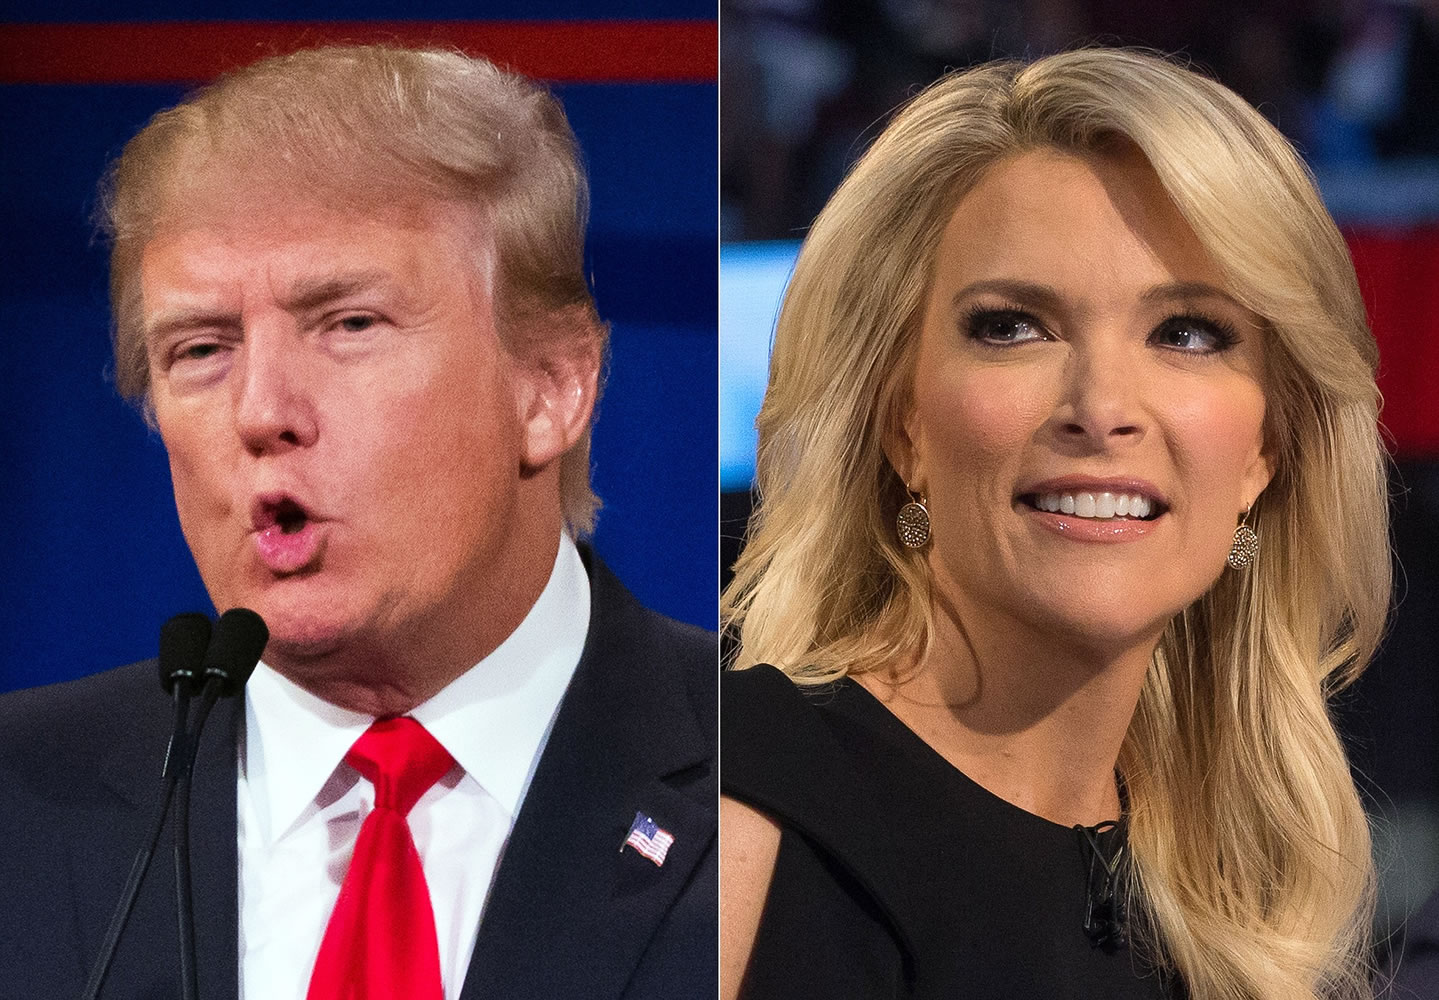 Donald Trump and Fox News Channel host and moderator Megyn Kelly